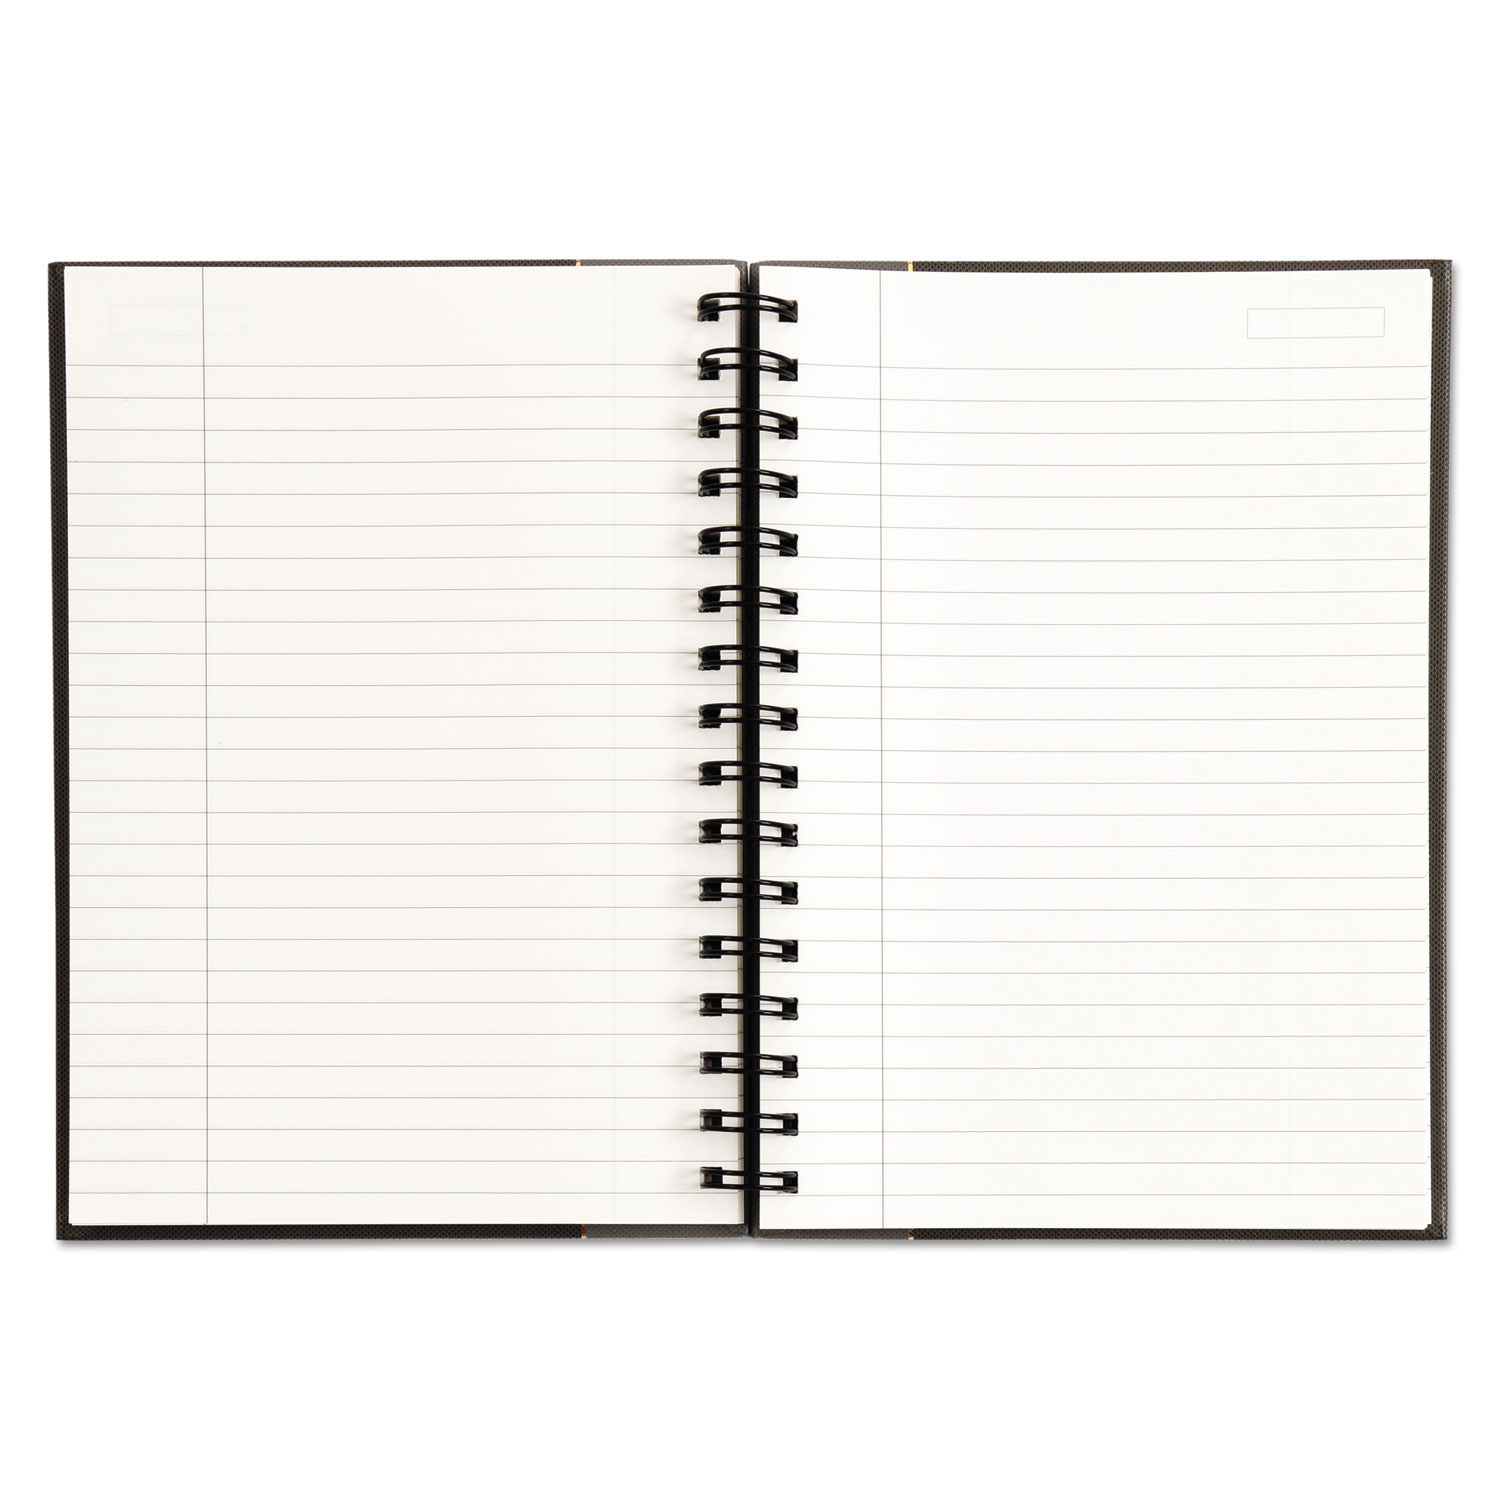 Royale Wirebound Business Notebook, Legal/Wide, 8 1/4 x 5 7/8, 96 Sheets